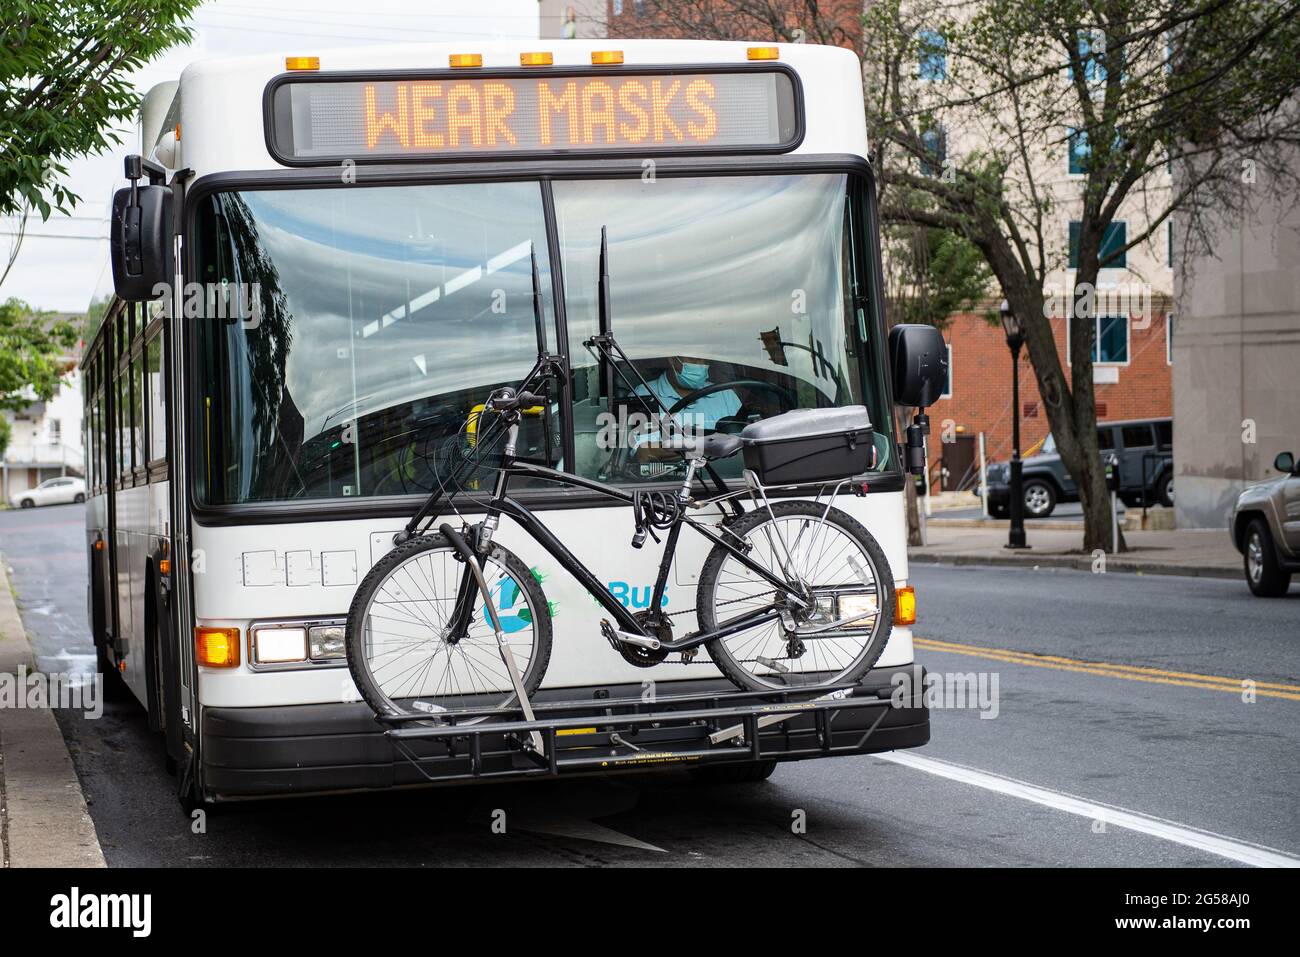 Public transportation bus with a sign that says WEAR MASKS and a bicycle on the front of the bus. Stock Photo